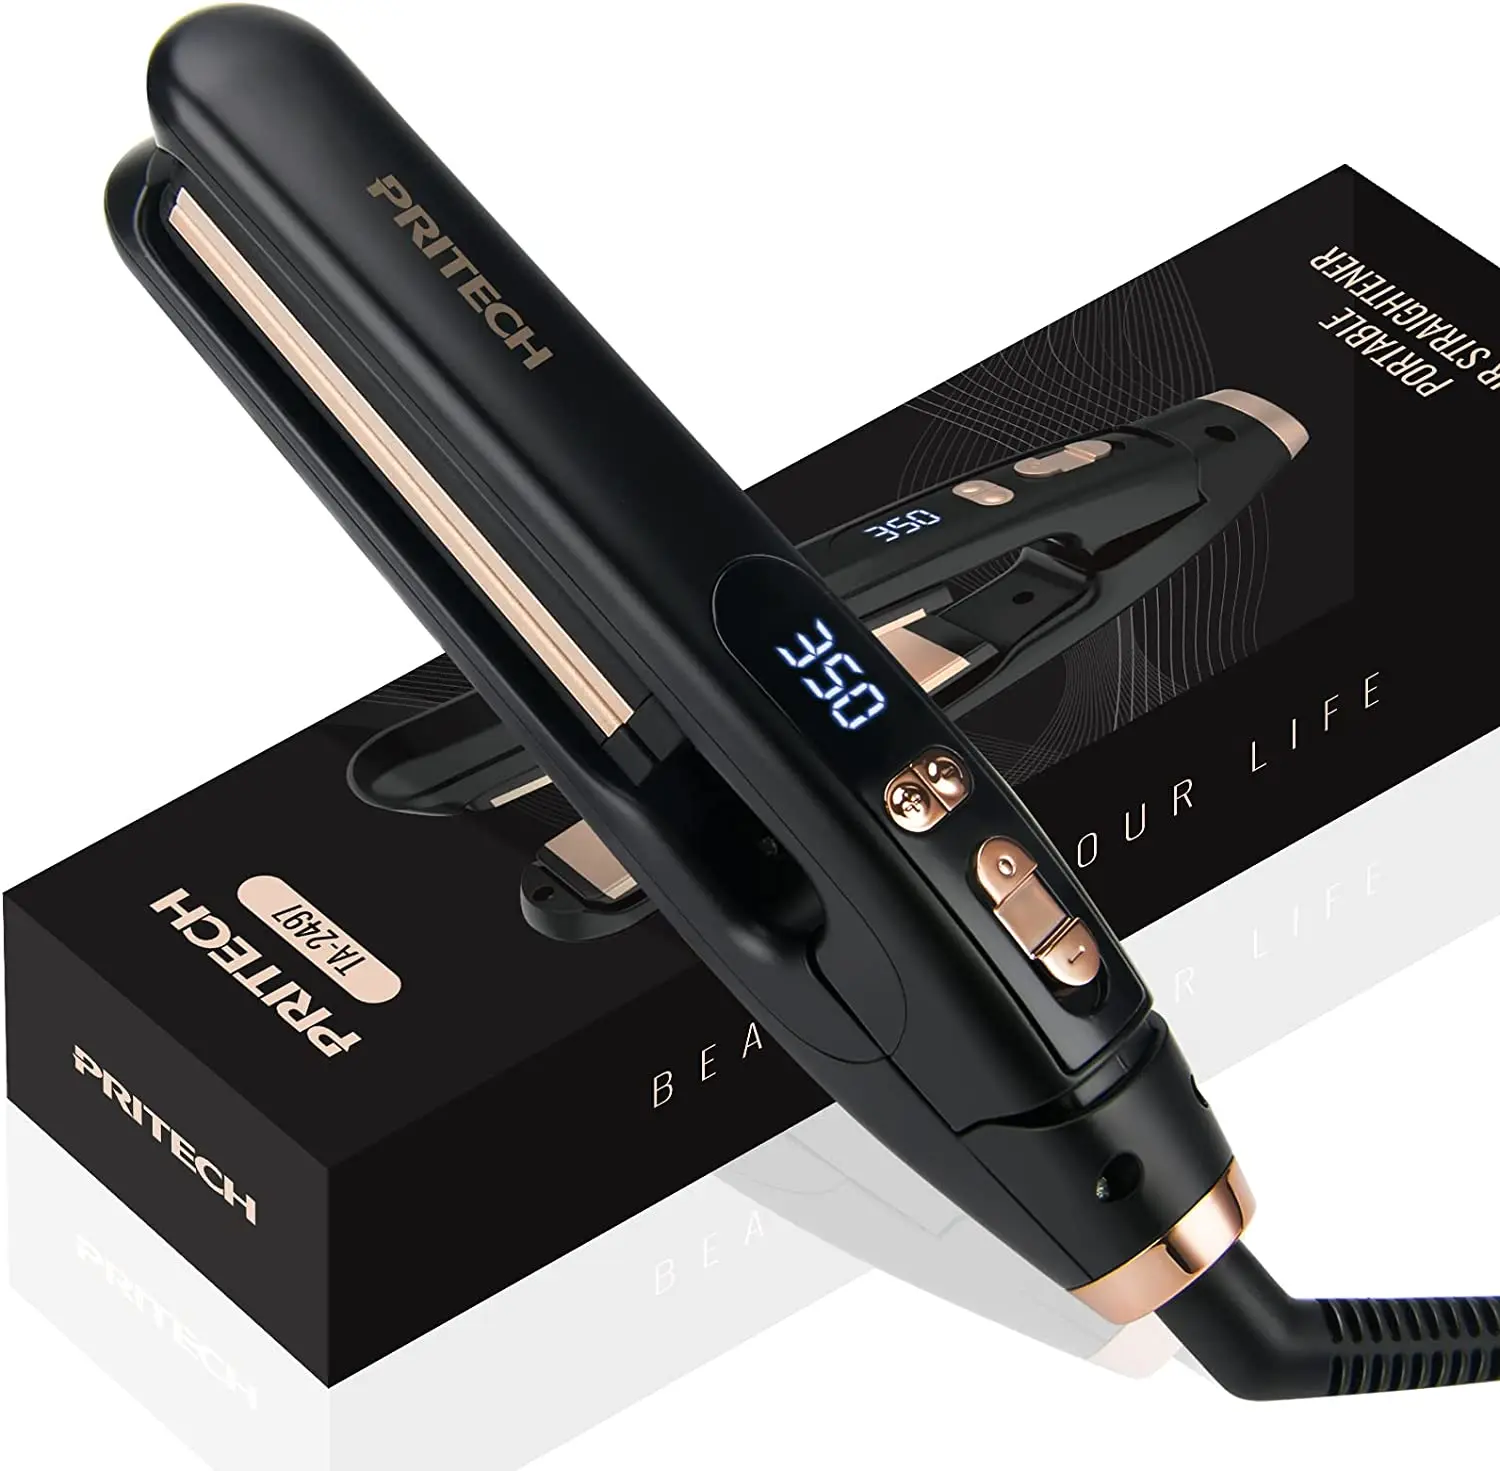 

Hair Straightener Portable Curling Irons with Adjustment Temperature for Fashion Hair Styling Mini Hair Curler Comb for Travel